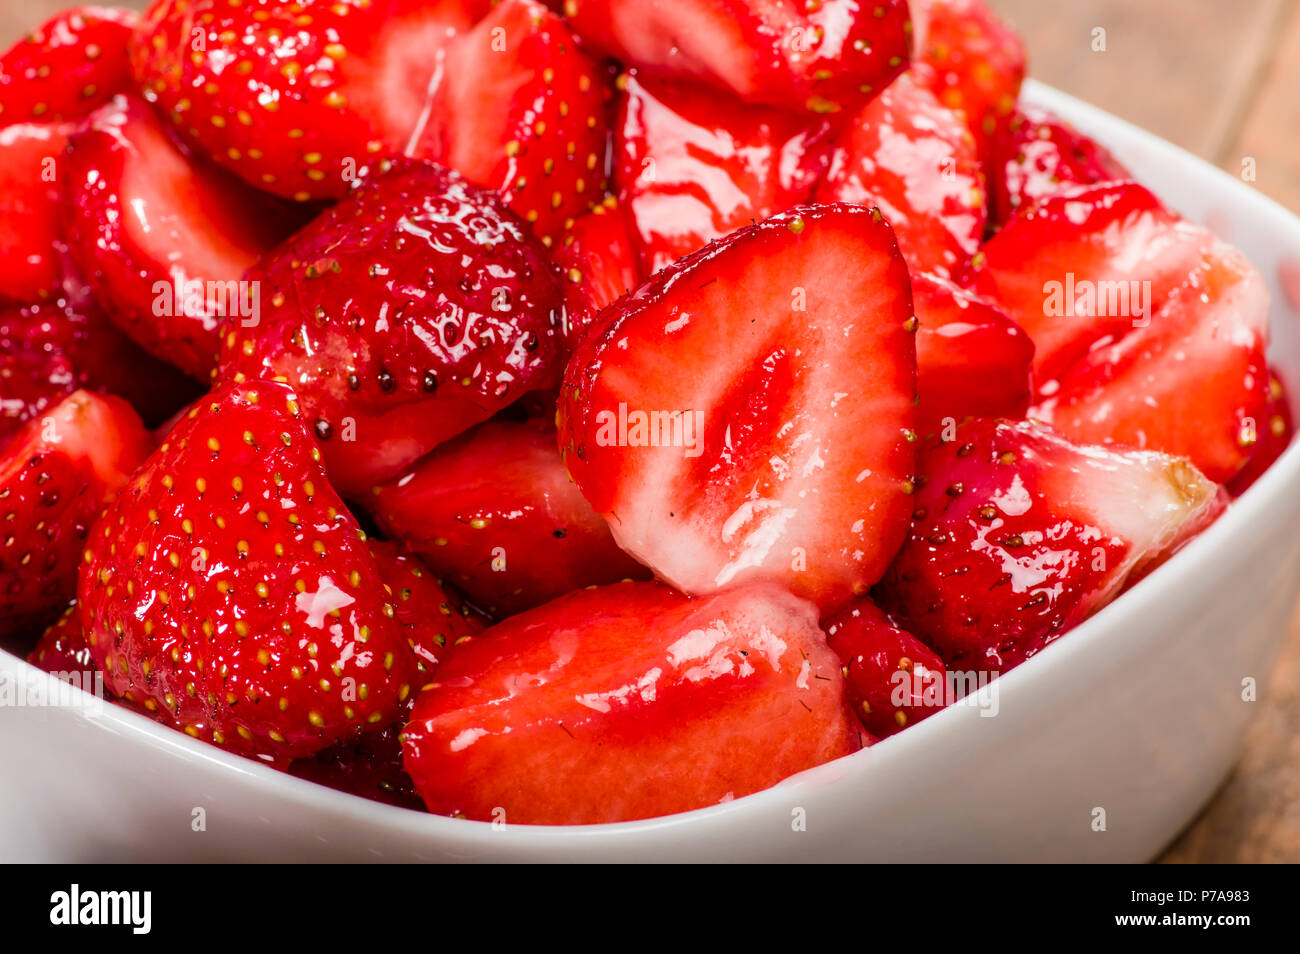 Bowl of red ripe glazed strawberries ready to serve Stock Photo